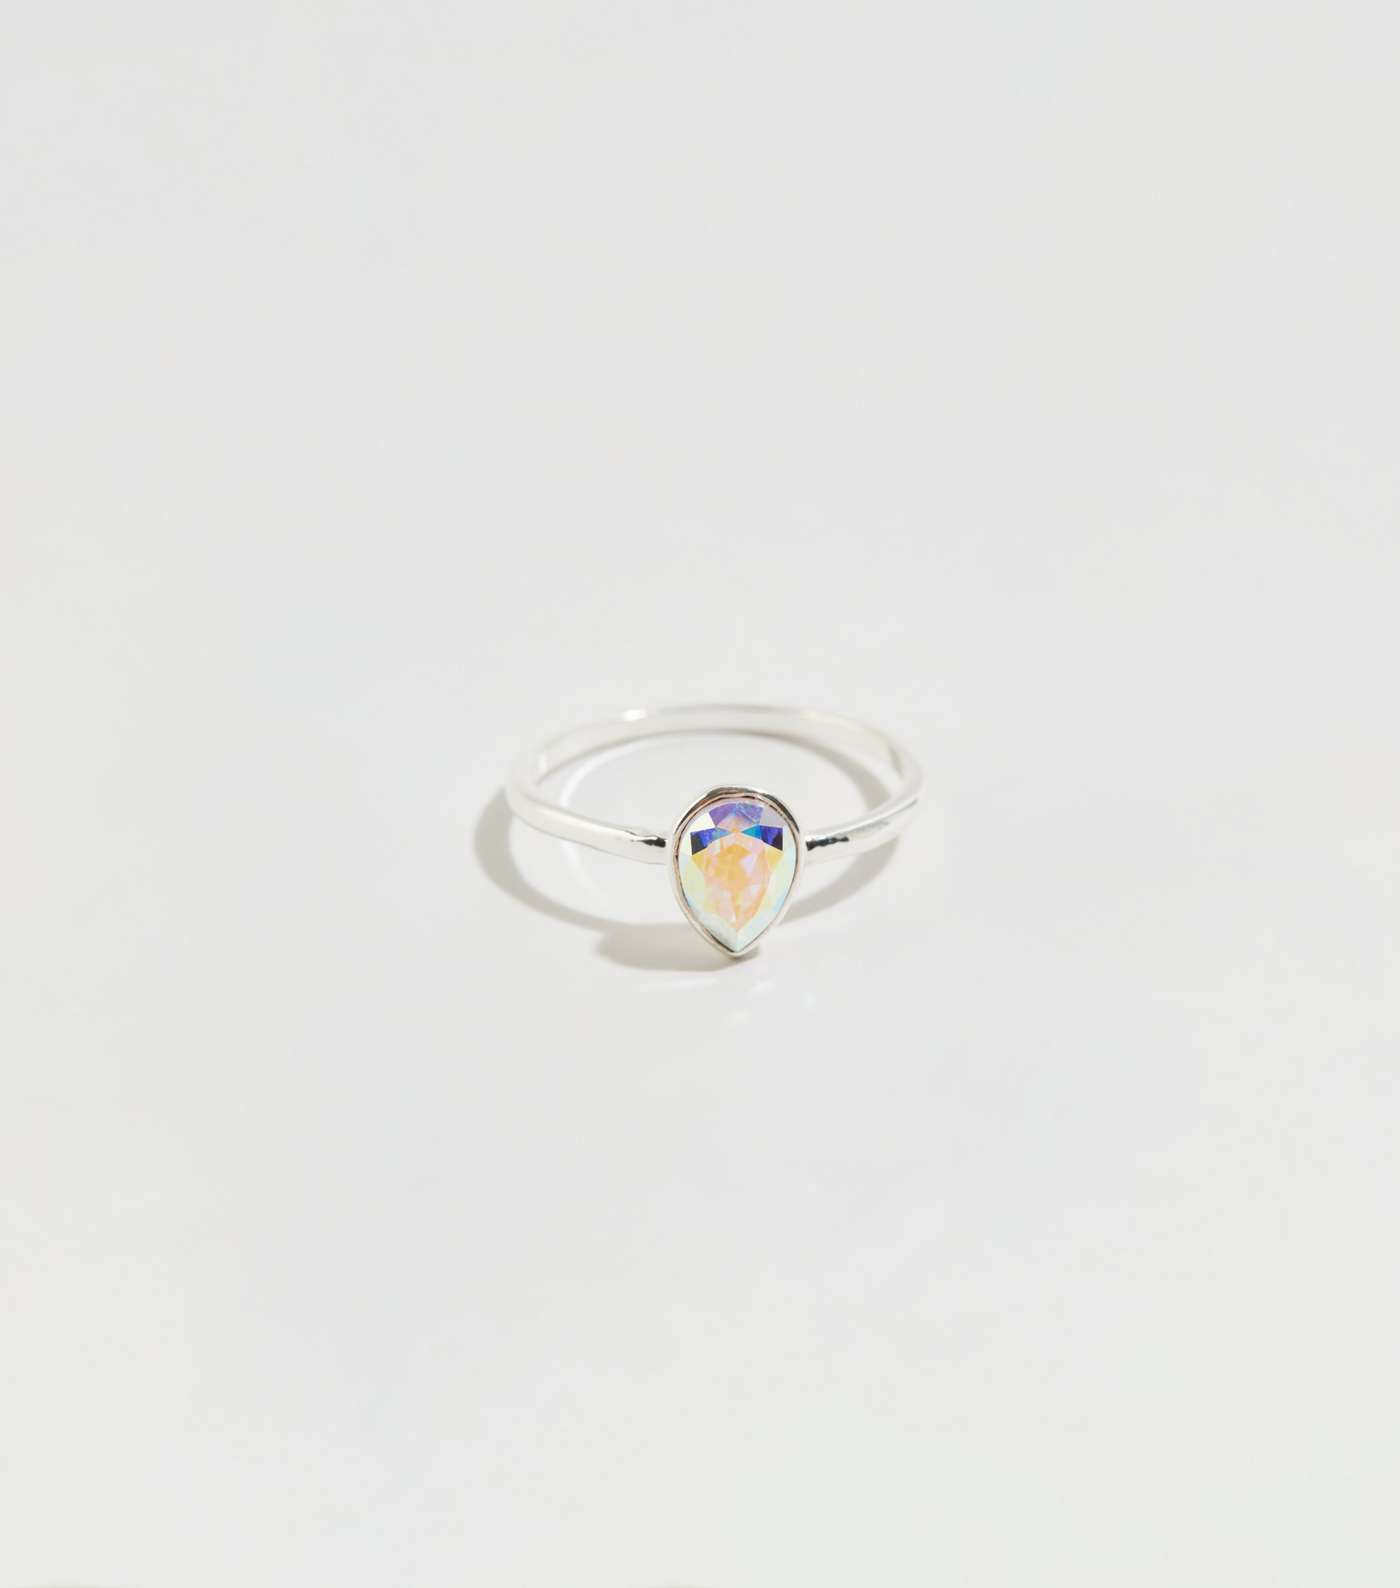 Silver Teardrop Ring with Crystals from Swarovski®